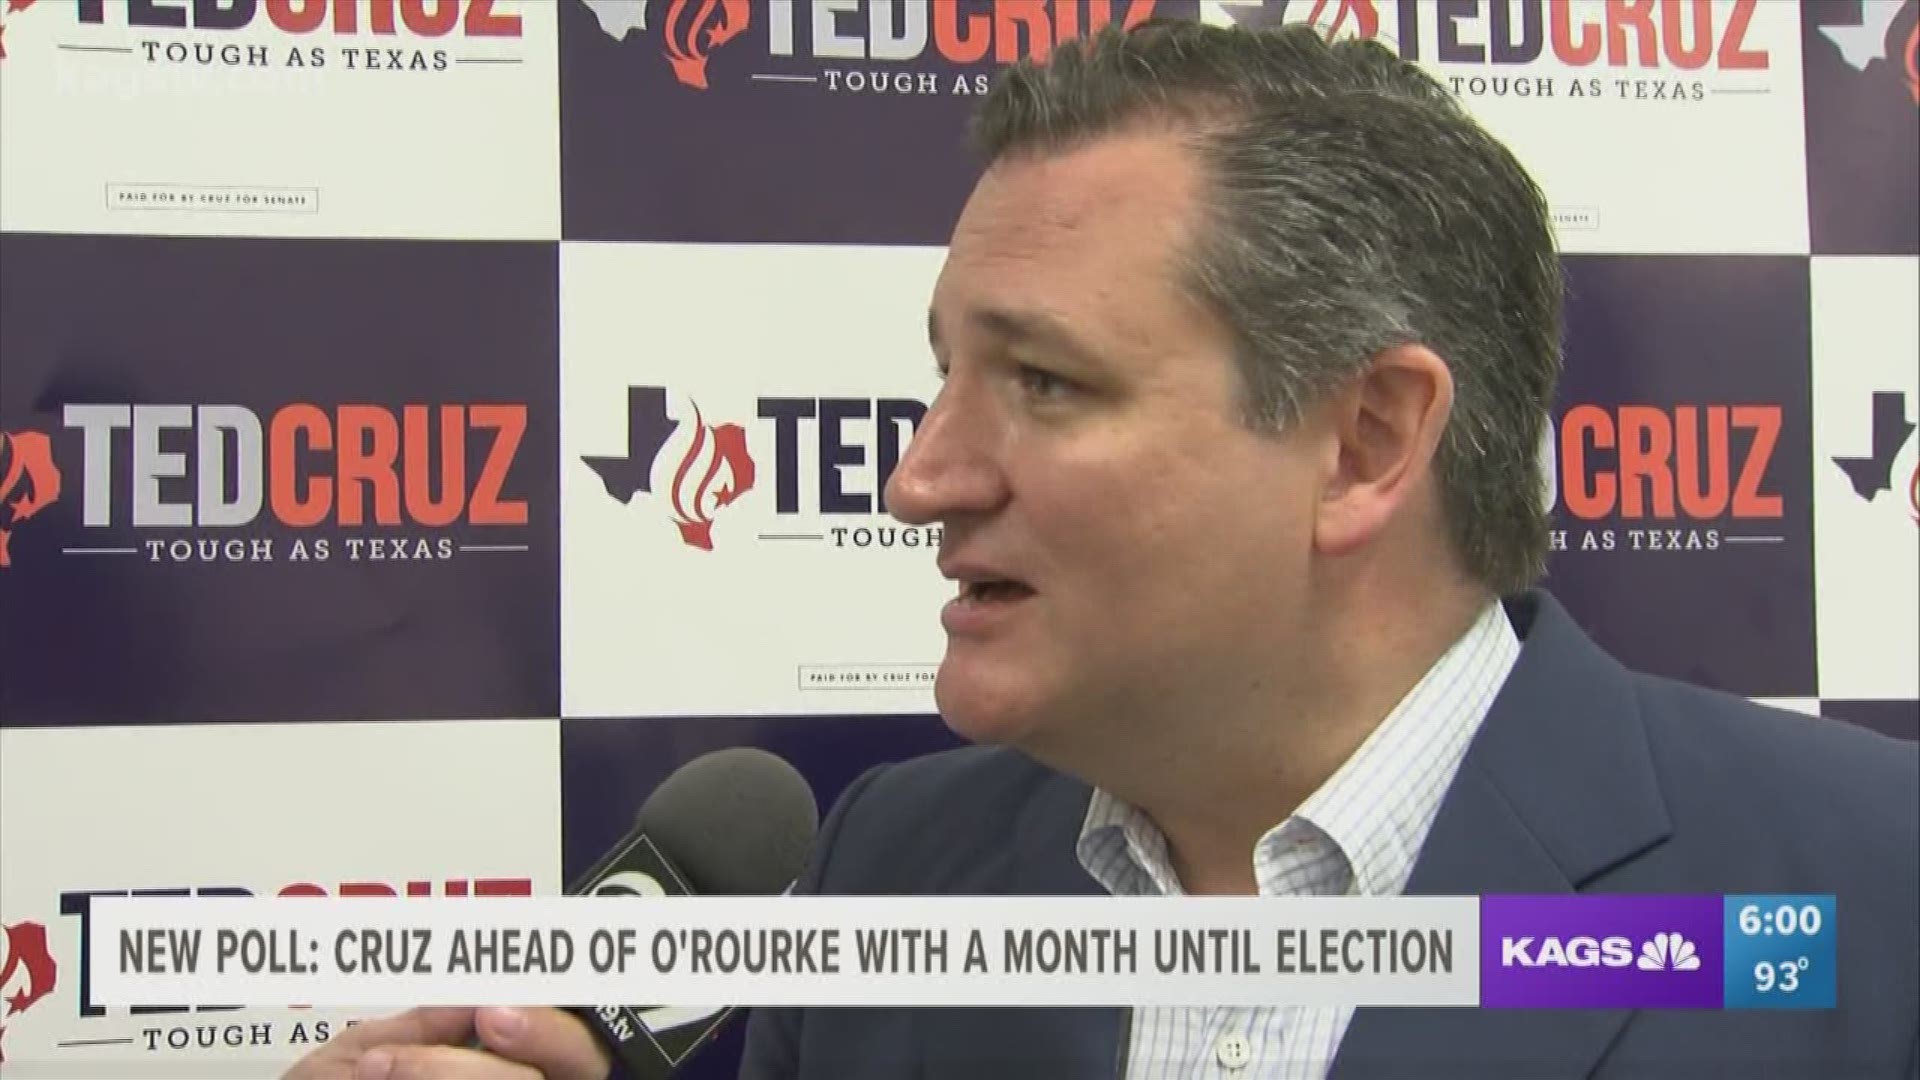 A new poll out today shows Senator Ted Cruz leading over challenger Beto O'Rourke with just over a month until Election Day.